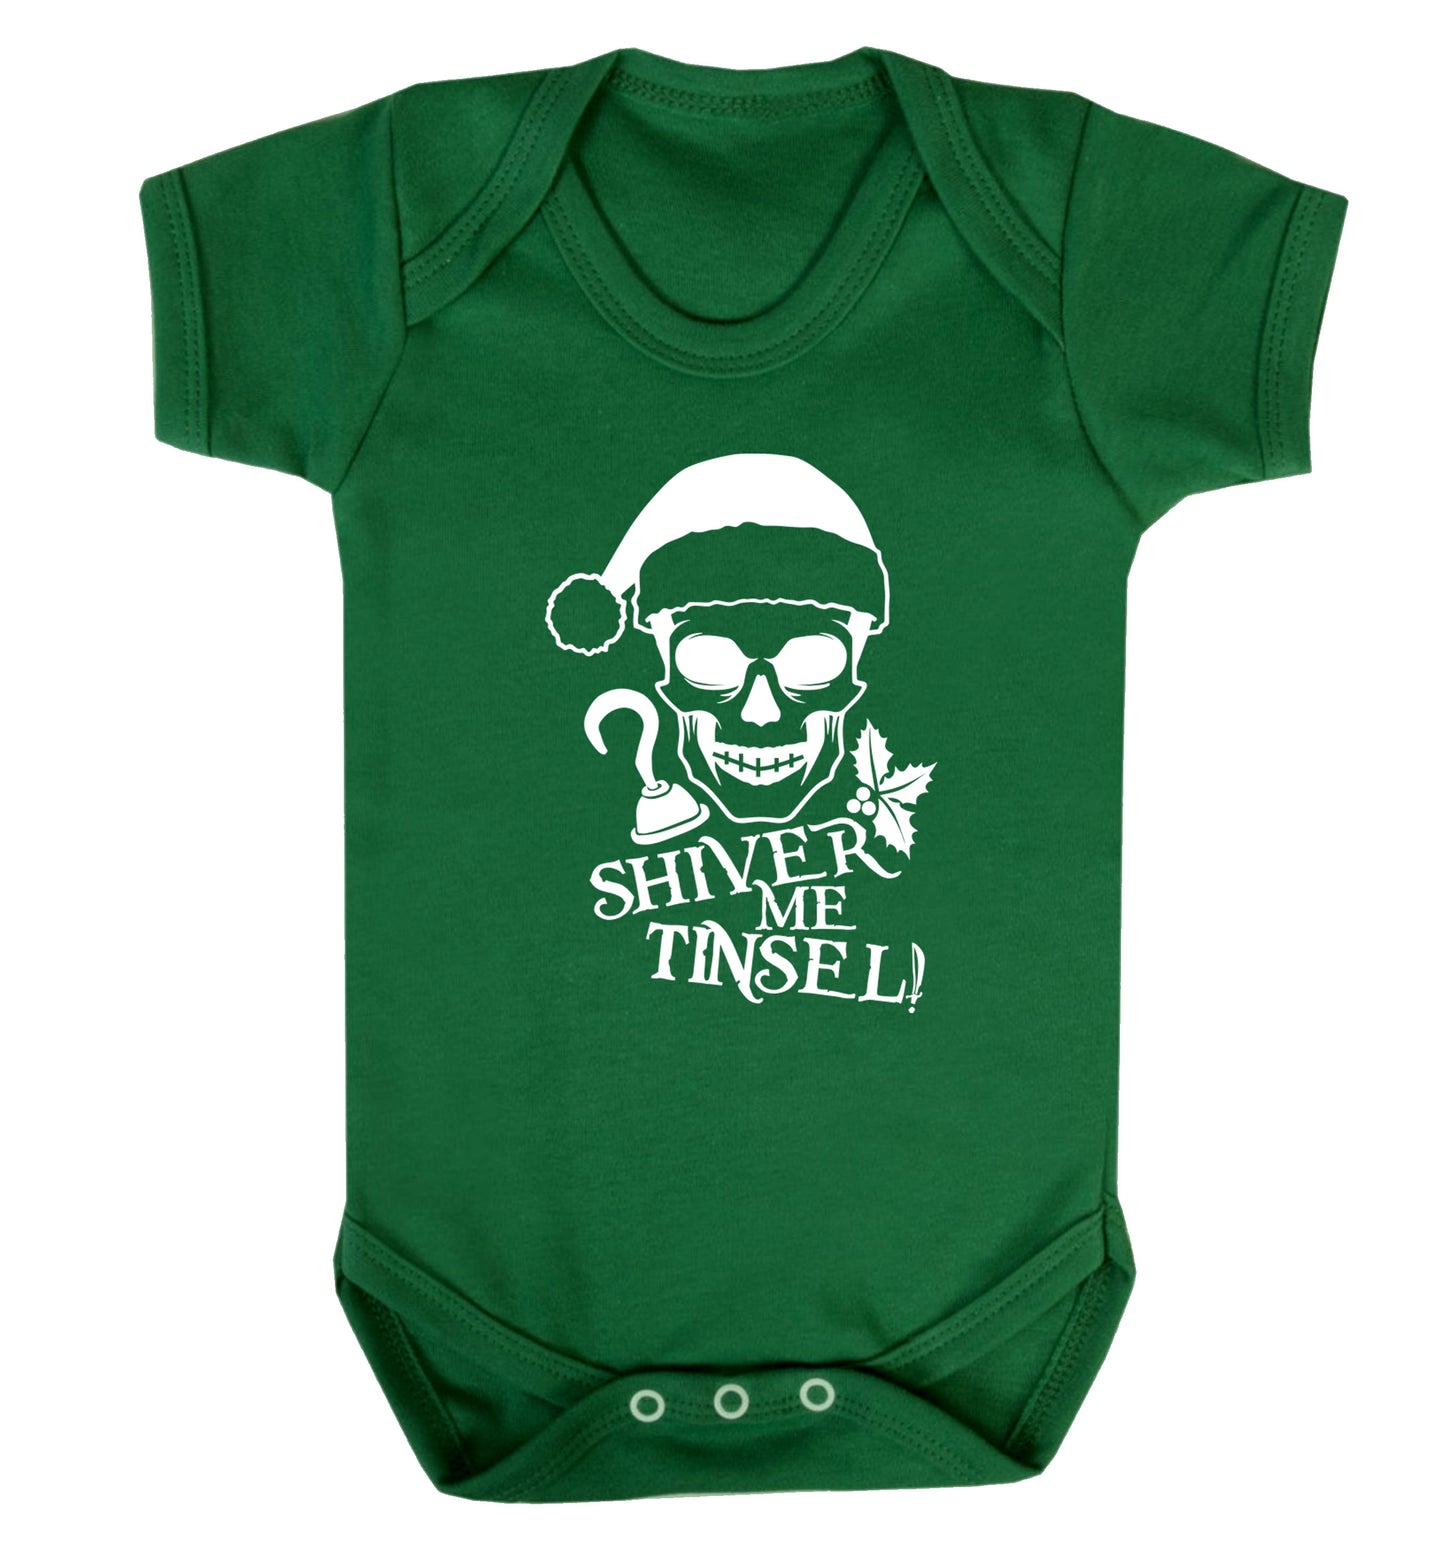 Shiver me tinsel Baby Vest green 18-24 months